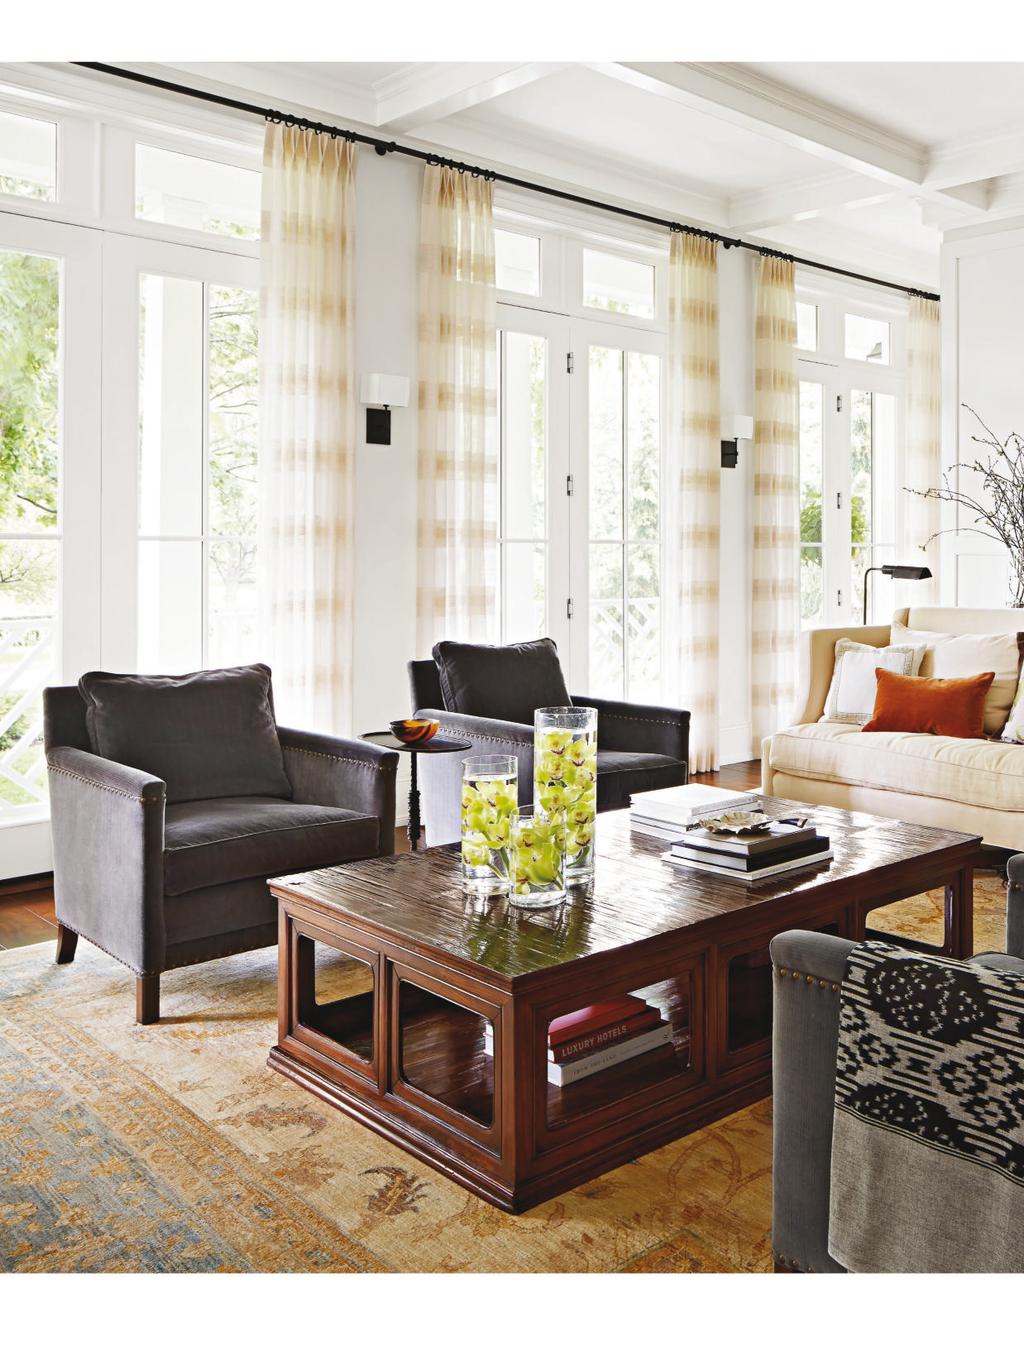 THIS PHOTO: Linear shapes abound in the light-filled living room. The elongated lines of paneled walls echo the configuration of the doors and transoms as well as the coffered ceilings.